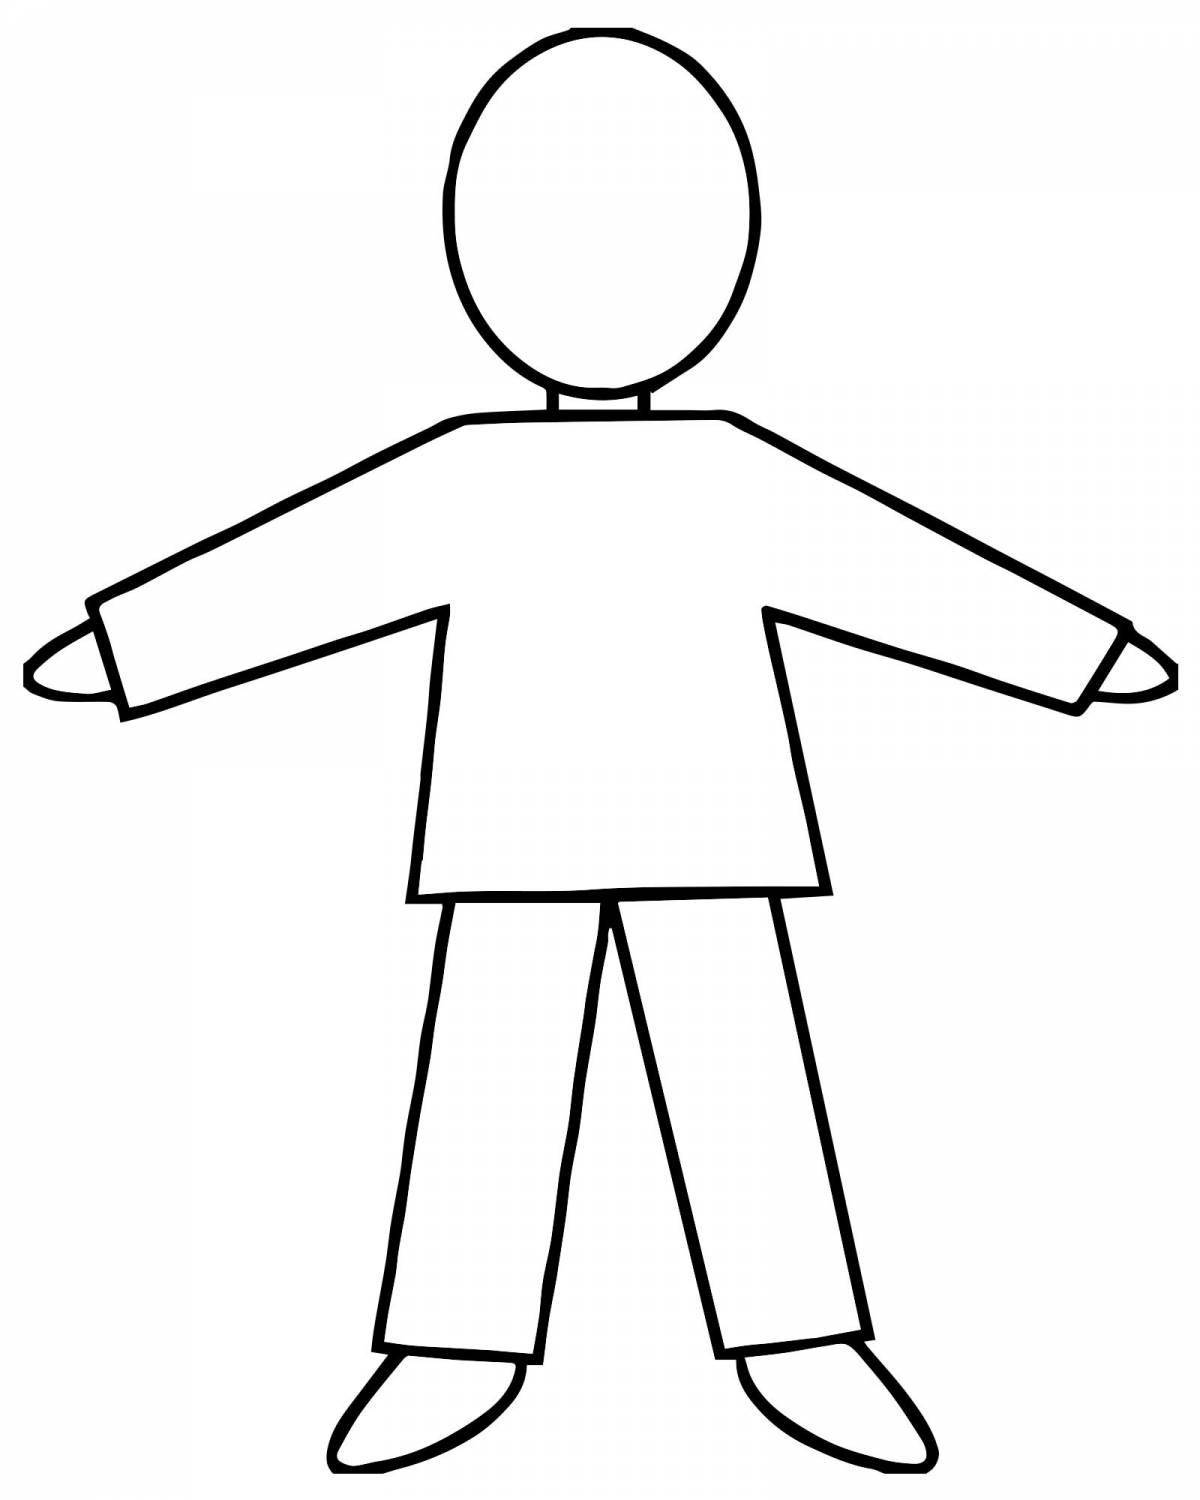 Coloring book exemplary male silhouette